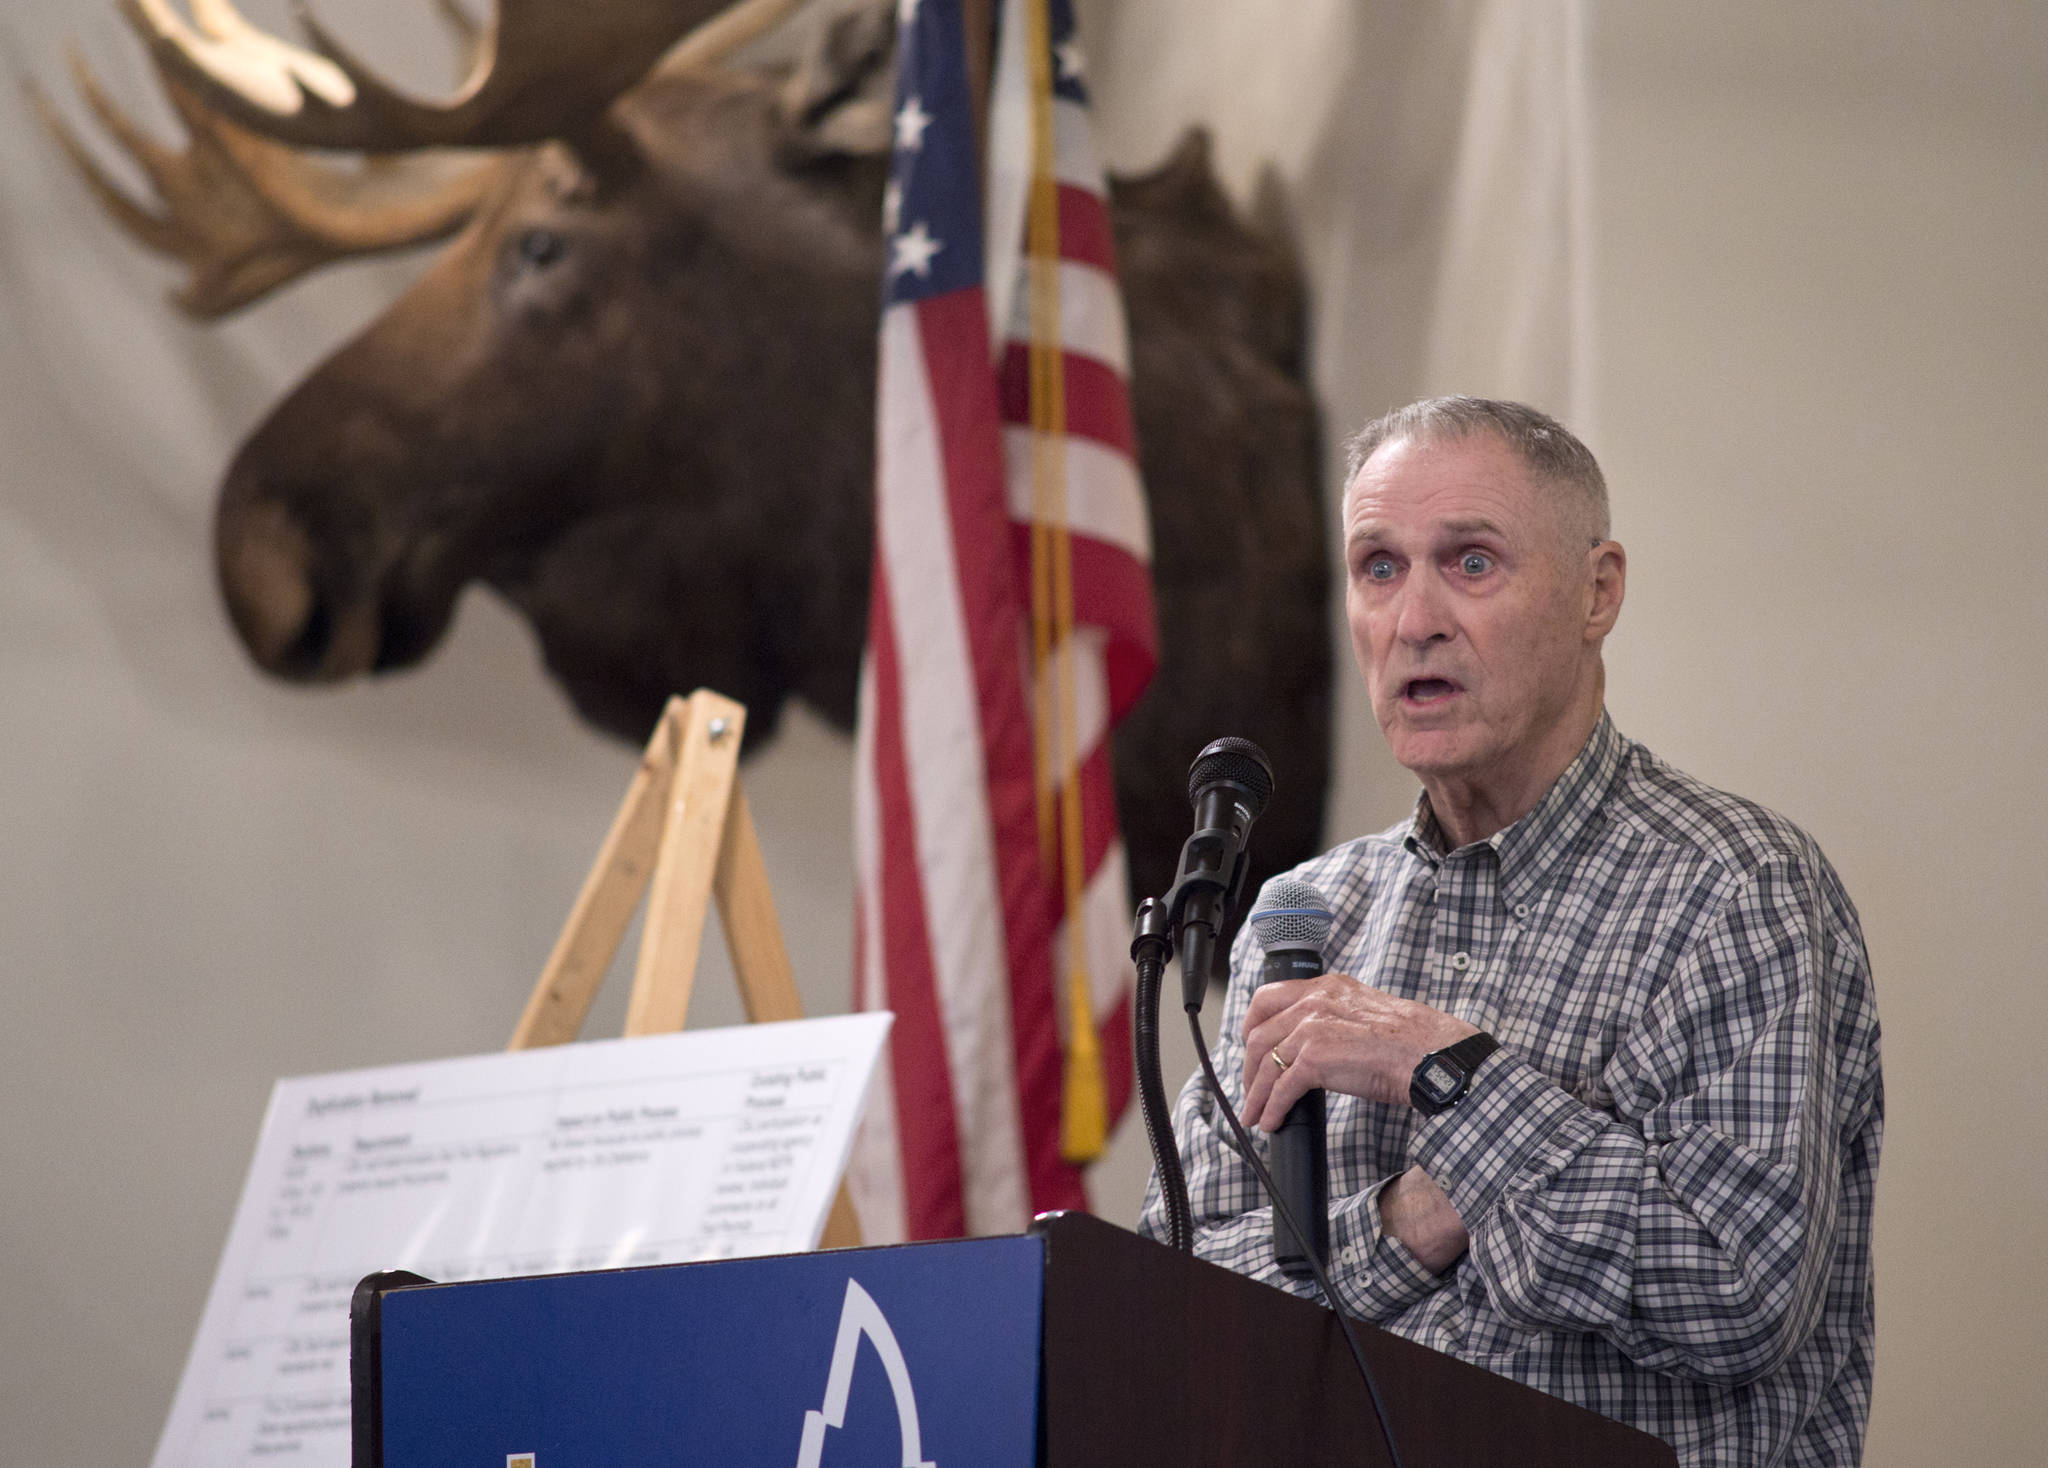 Long-time resident and local businessman Bill Corbus speaks to the Juneau Chamber of Commerce during their weekly luncheon in May 2017. (Michael Penn / Juneau Empire File)